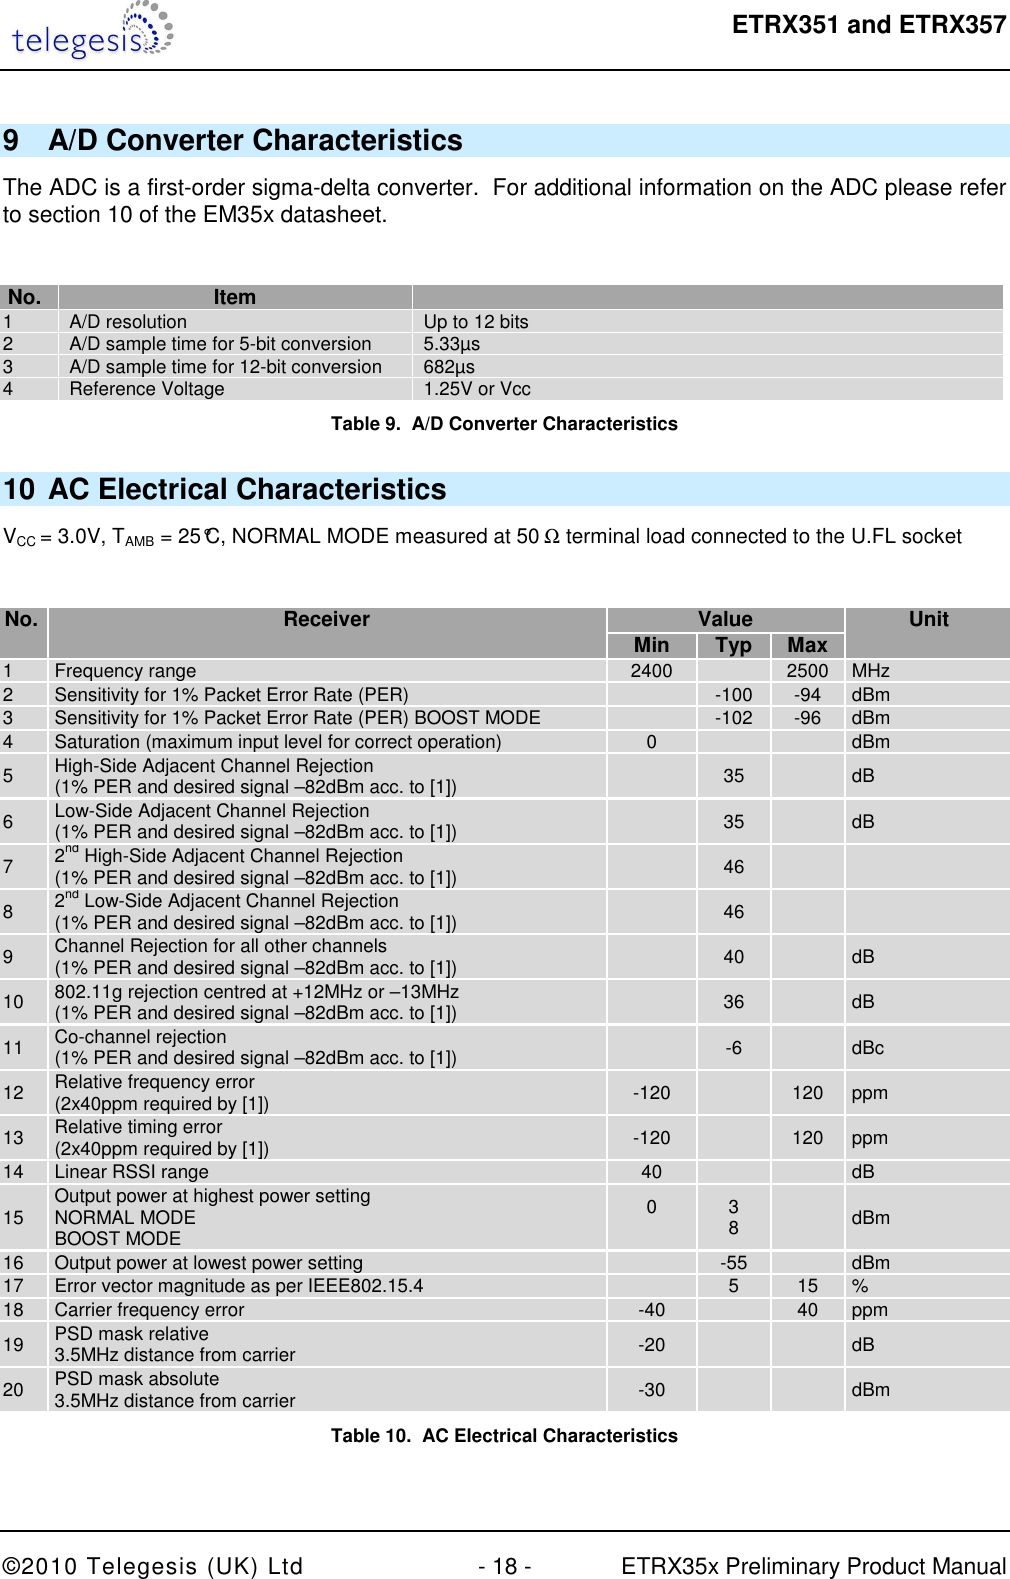  ETRX351 and ETRX357  ©2010 Telegesis (UK) Ltd  - 18 -  ETRX35x Preliminary Product Manual 9  A/D Converter Characteristics The ADC is a first-order sigma-delta converter.  For additional information on the ADC please refer to section 10 of the EM35x datasheet.  No. Item  1  A/D resolution  Up to 12 bits  2  A/D sample time for 5-bit conversion  5.33µs  3  A/D sample time for 12-bit conversion  682µs 4  Reference Voltage  1.25V or Vcc Table 9.  A/D Converter Characteristics 10 AC Electrical Characteristics VCC = 3.0V, TAMB = 25°C, NORMAL MODE measured at 50 Ω terminal load connected to the U.FL socket   No. Receiver Value Unit   Min Typ Max  1  Frequency range  2400    2500  MHz 2  Sensitivity for 1% Packet Error Rate (PER)    -100  -94  dBm 3  Sensitivity for 1% Packet Error Rate (PER) BOOST MODE    -102  -96  dBm 4  Saturation (maximum input level for correct operation)  0      dBm 5  High-Side Adjacent Channel Rejection  (1% PER and desired signal –82dBm acc. to [1])    35    dB 6  Low-Side Adjacent Channel Rejection  (1% PER and desired signal –82dBm acc. to [1])    35    dB 7  2nd High-Side Adjacent Channel Rejection  (1% PER and desired signal –82dBm acc. to [1])    46     8  2nd Low-Side Adjacent Channel Rejection  (1% PER and desired signal –82dBm acc. to [1])    46     9  Channel Rejection for all other channels (1% PER and desired signal –82dBm acc. to [1])    40    dB 10  802.11g rejection centred at +12MHz or –13MHz (1% PER and desired signal –82dBm acc. to [1])    36    dB 11  Co-channel rejection (1% PER and desired signal –82dBm acc. to [1])    -6    dBc 12  Relative frequency error (2x40ppm required by [1])  -120    120  ppm 13  Relative timing error (2x40ppm required by [1])  -120    120  ppm 14  Linear RSSI range  40      dB 15  Output power at highest power setting NORMAL MODE BOOST MODE 0  3 8    dBm 16  Output power at lowest power setting    -55    dBm 17  Error vector magnitude as per IEEE802.15.4    5  15  % 18  Carrier frequency error  -40    40  ppm 19  PSD mask relative 3.5MHz distance from carrier  -20      dB 20  PSD mask absolute 3.5MHz distance from carrier  -30      dBm Table 10.  AC Electrical Characteristics  